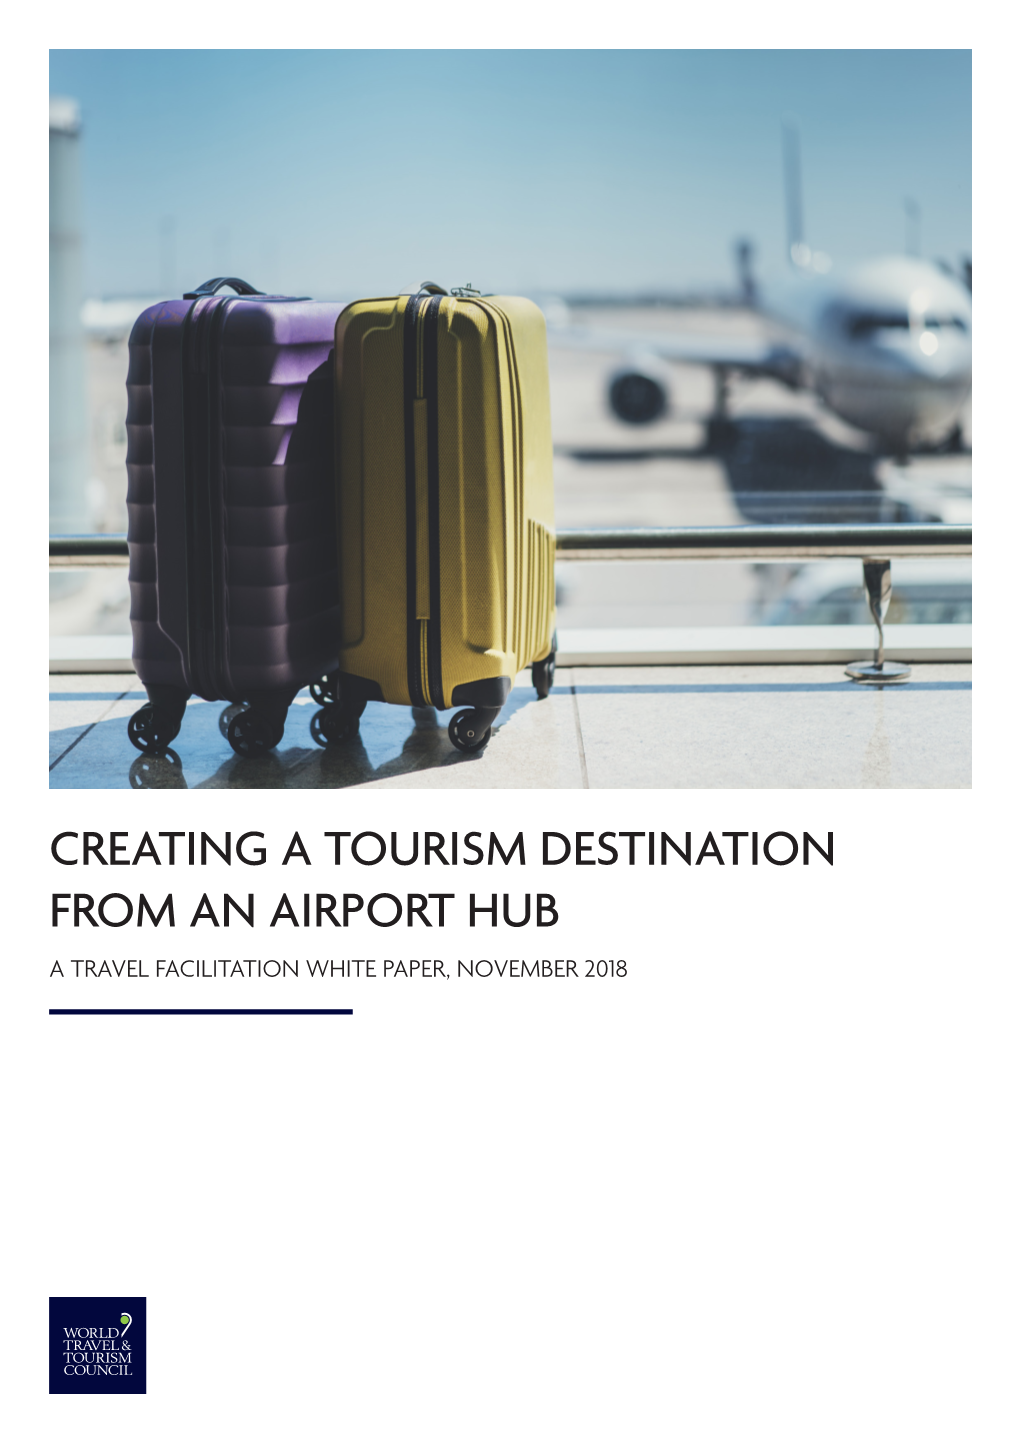 Creating a Tourism Destination from an Airport Hub 11/11/2018